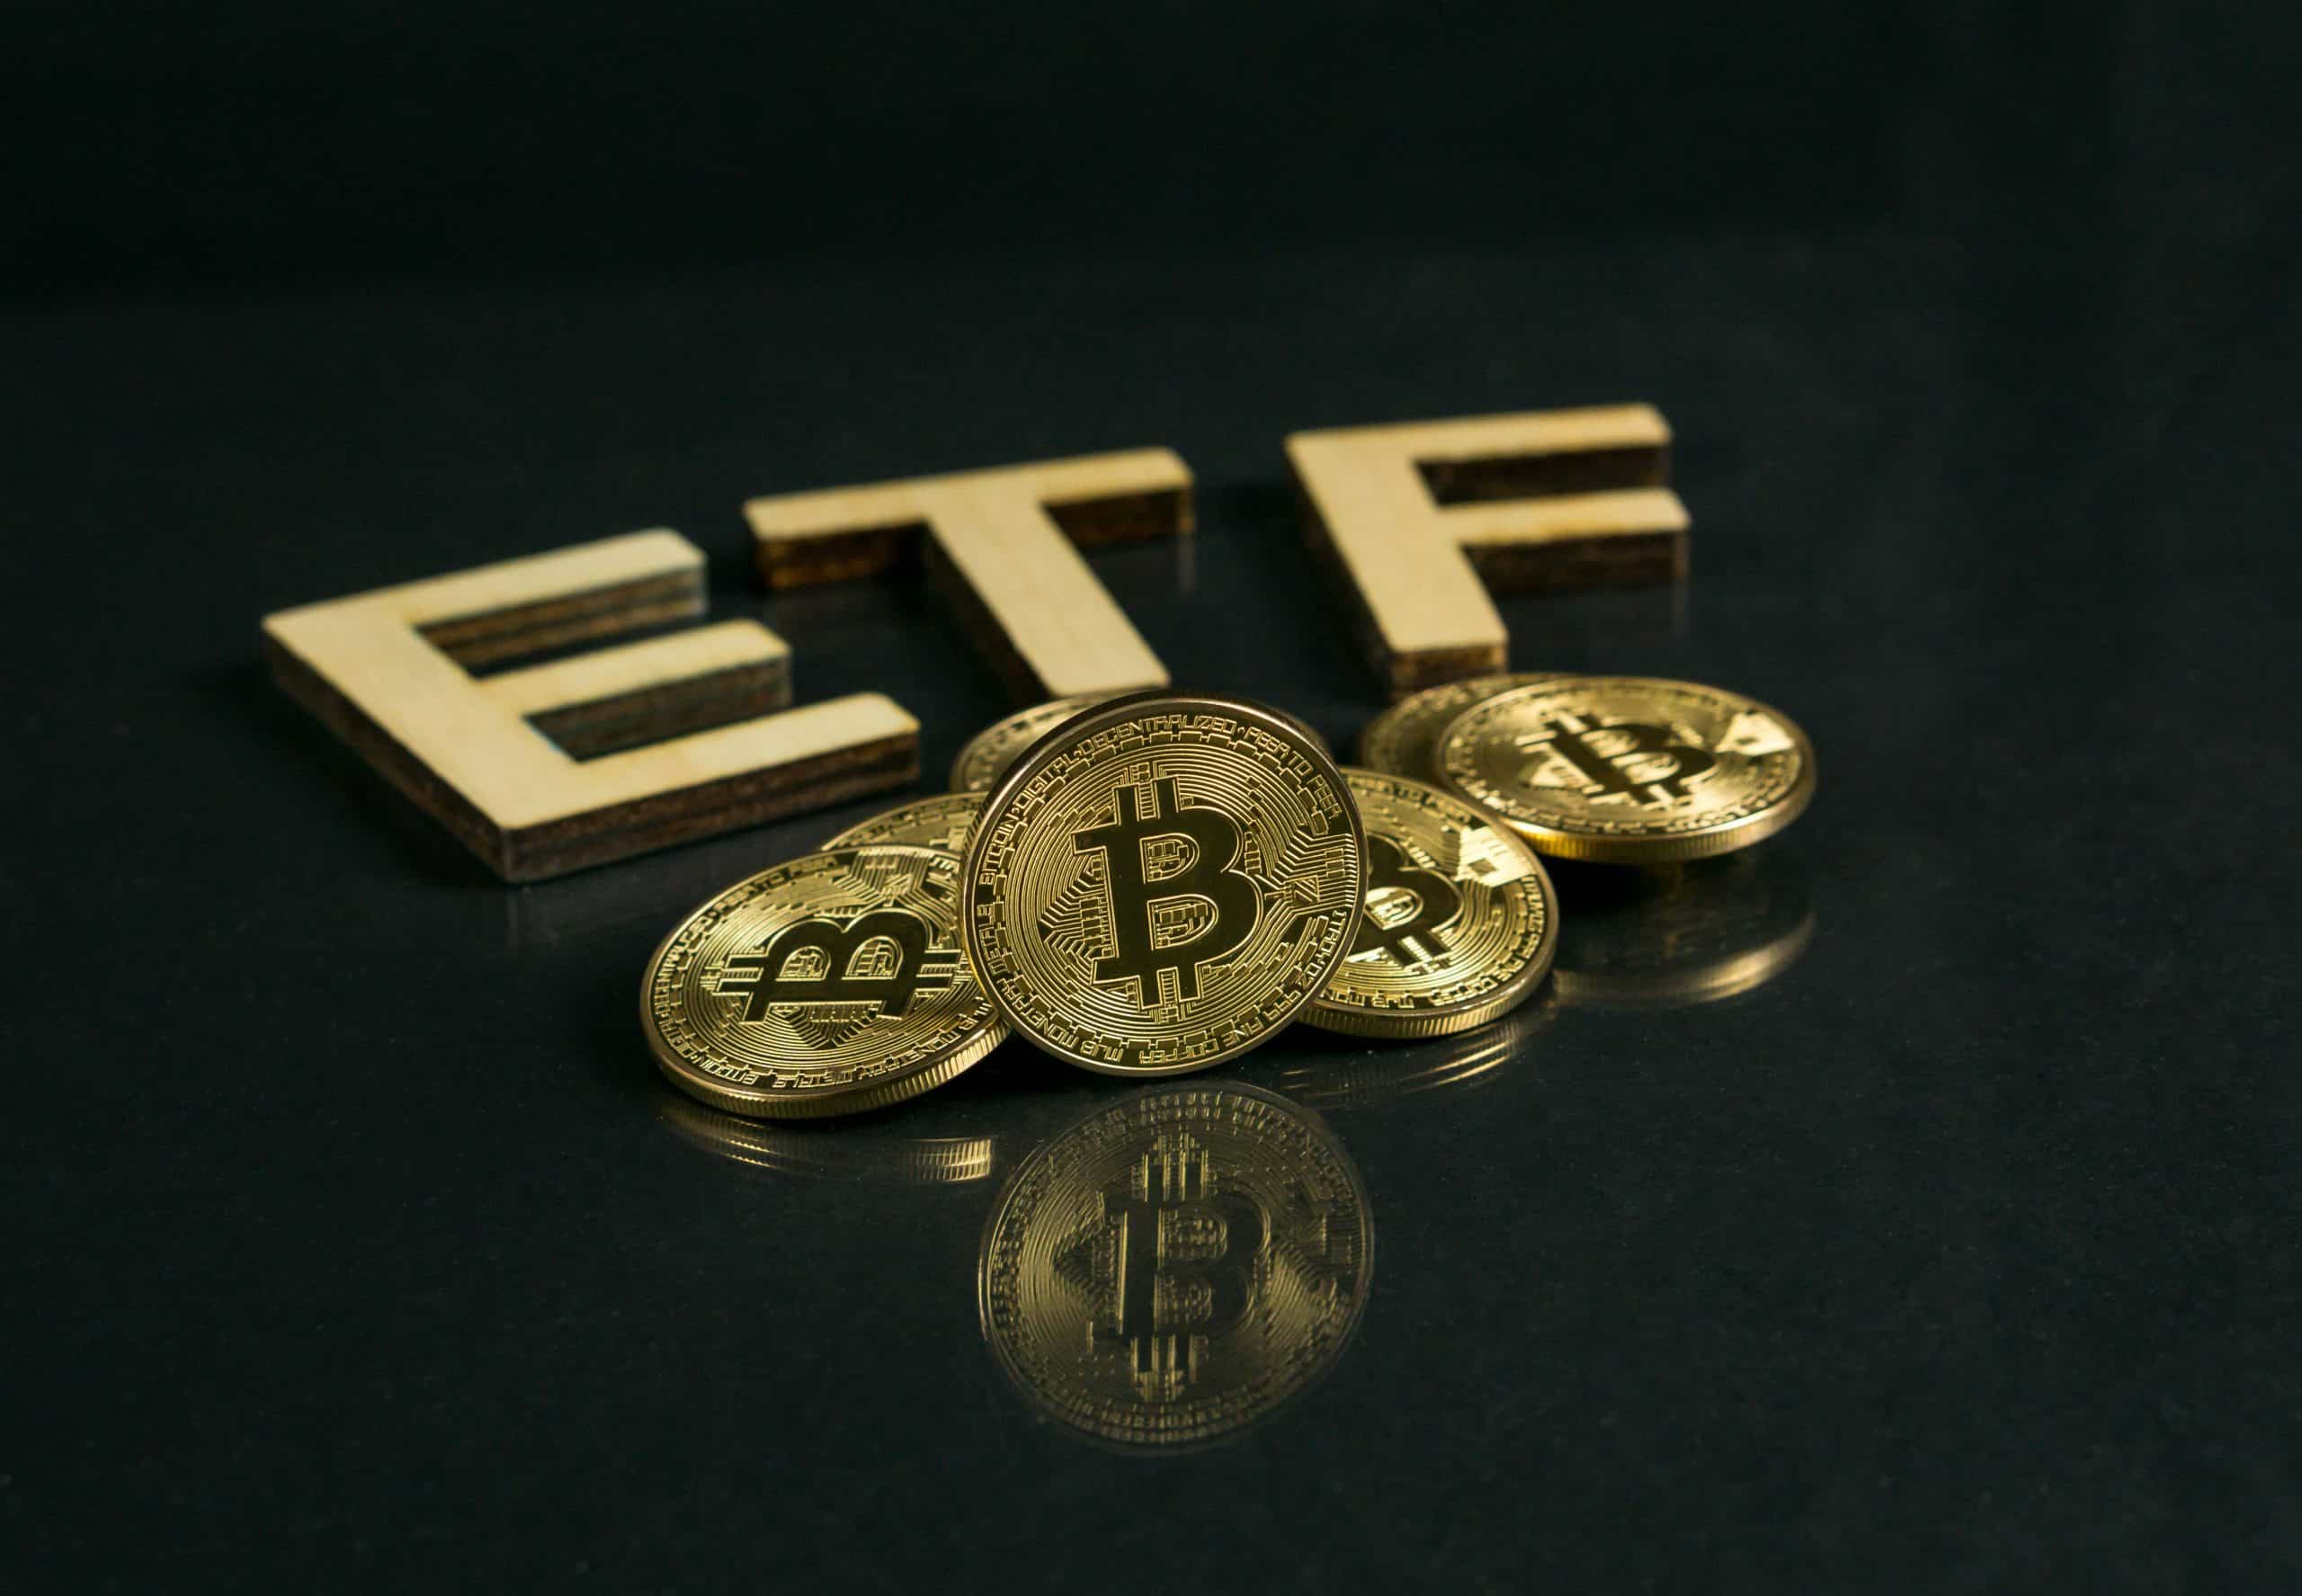 valkyrie-co-founder-anticipates-10-billion-inflows-for-spot-bitcoin-etfs-by-end-of-year